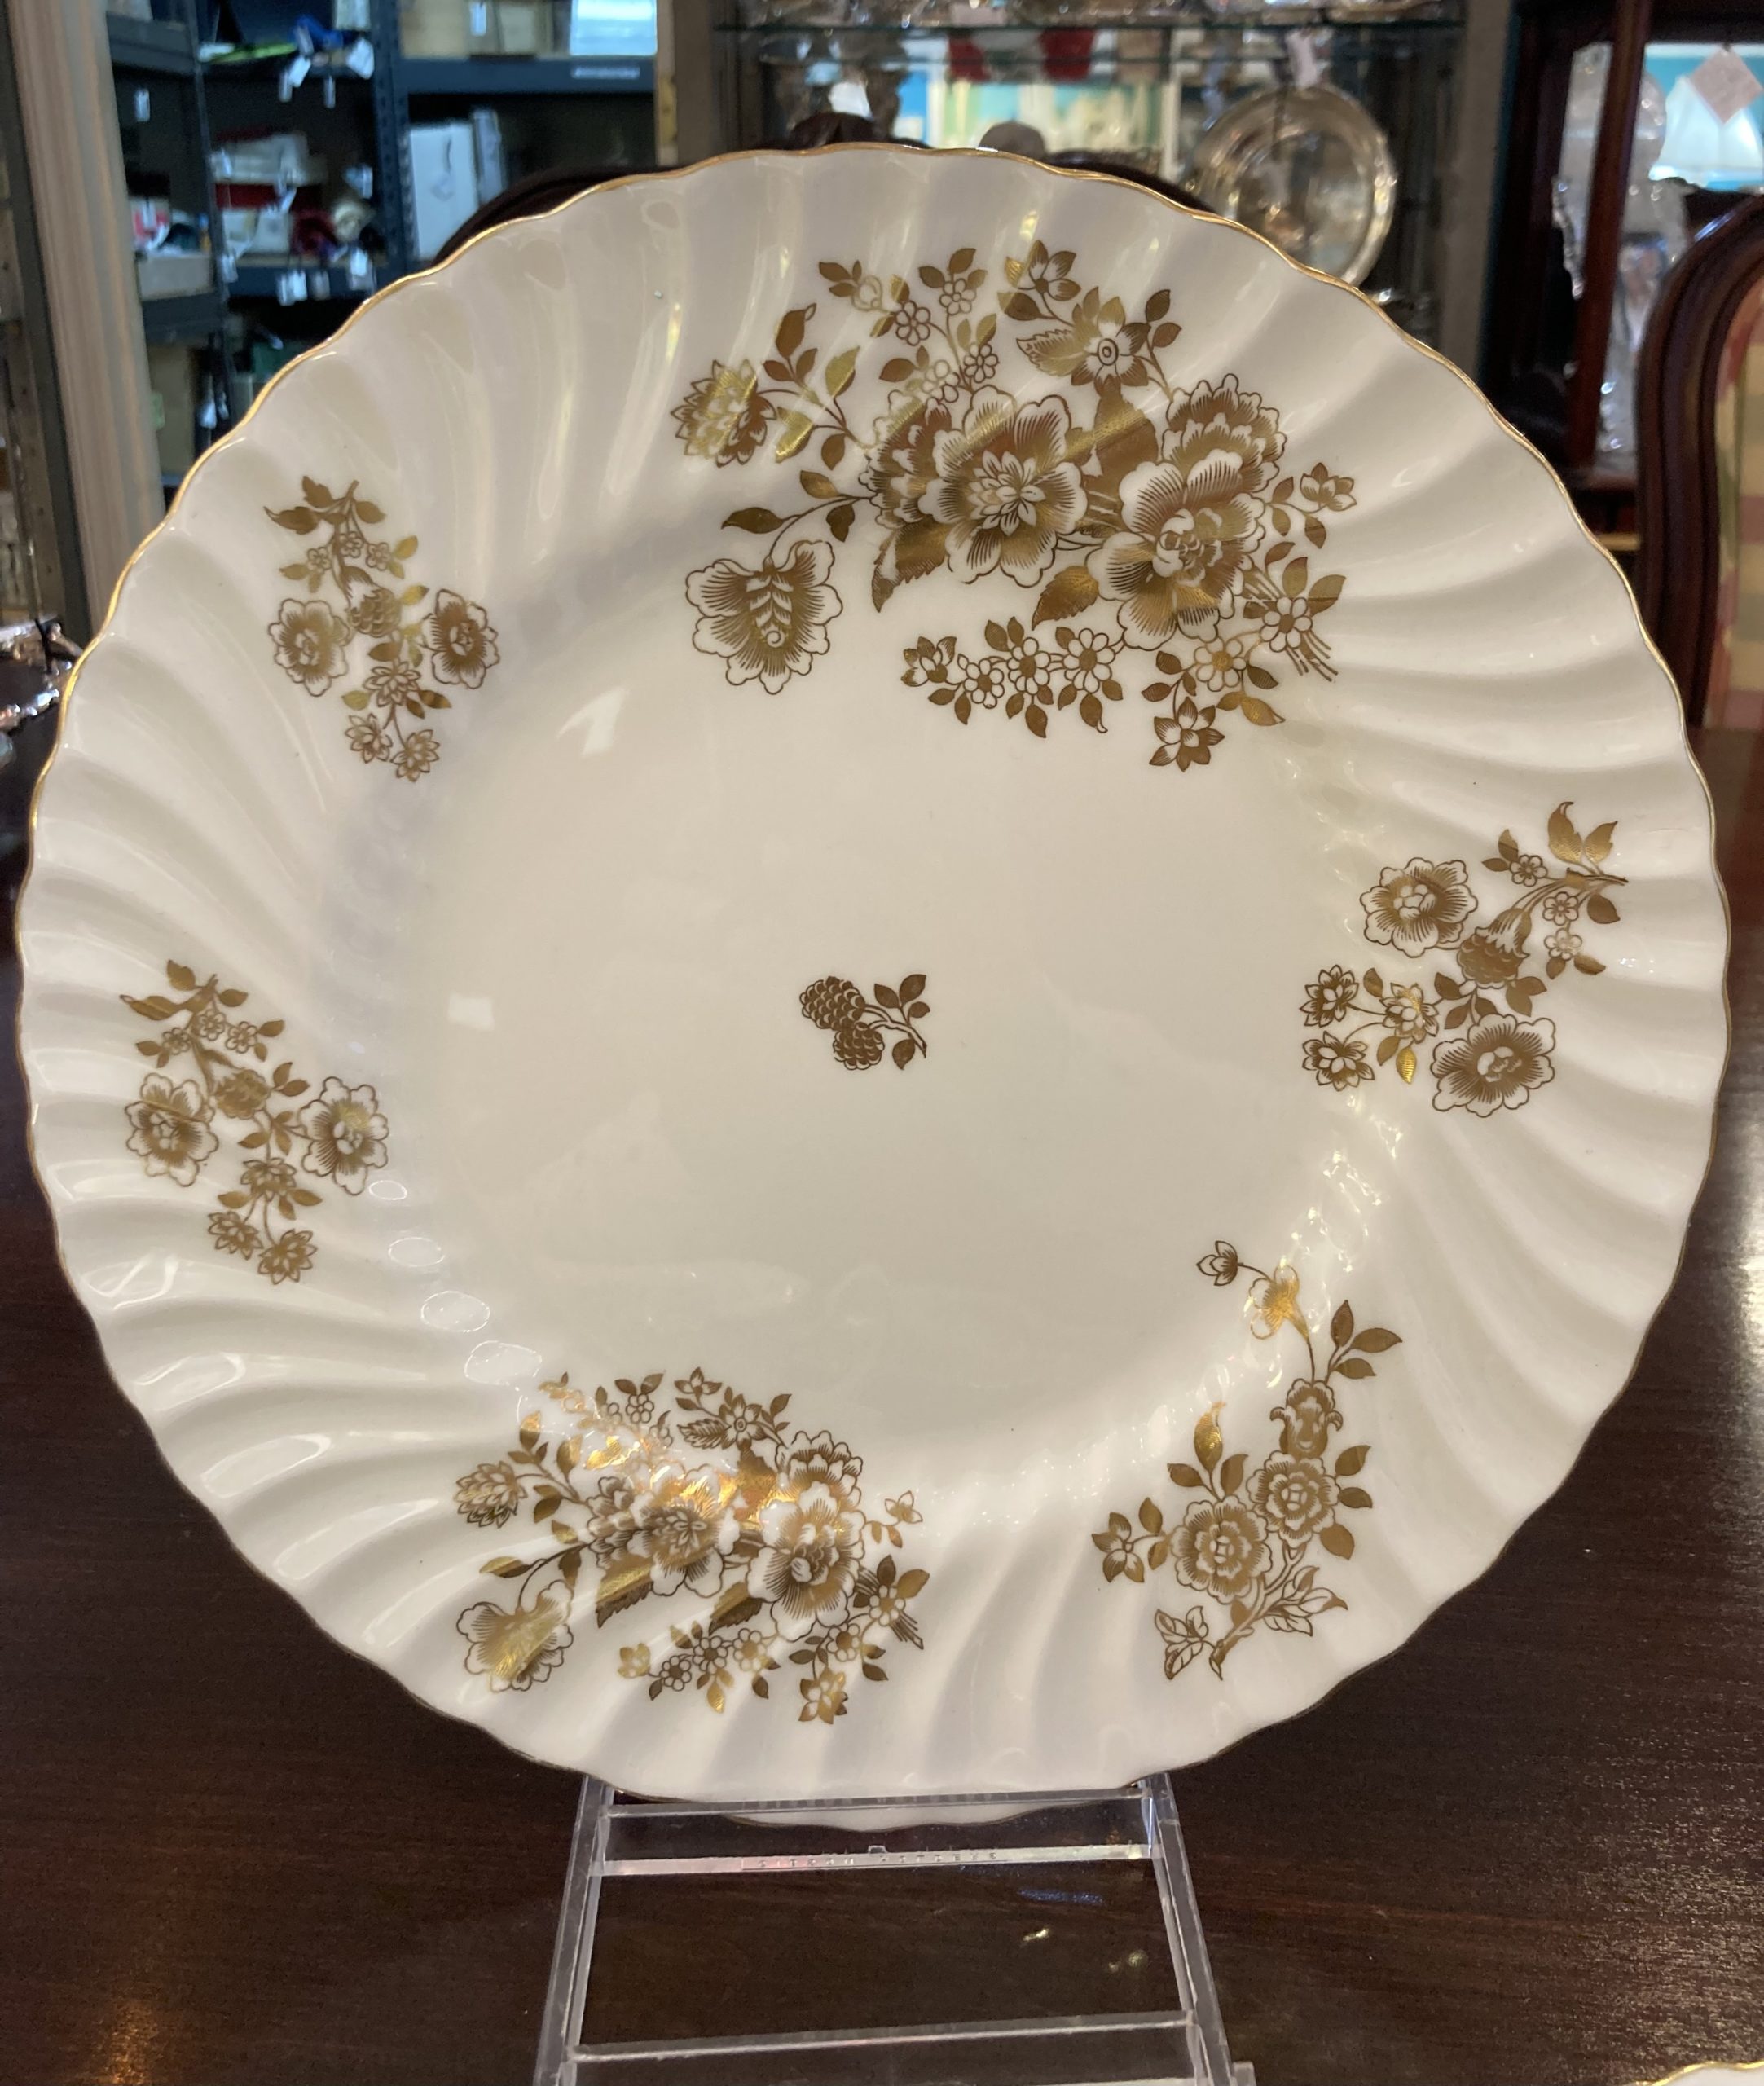 Minton Audley English China 75 pieces